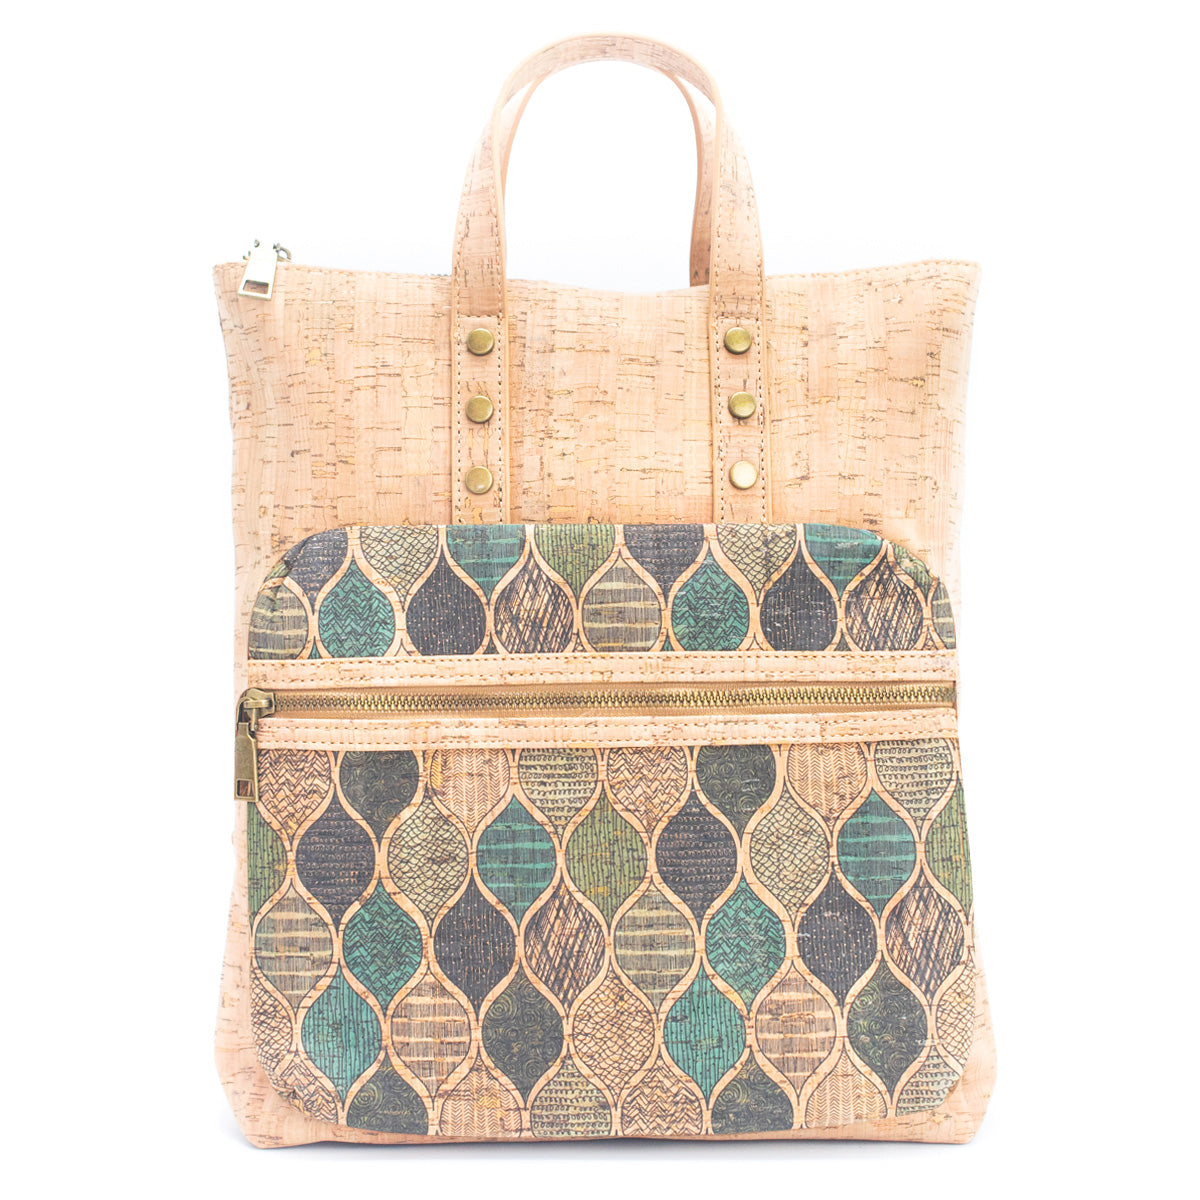 Cork Women's Hand-carry Vegan Backpack | THE CORK COLLECTION